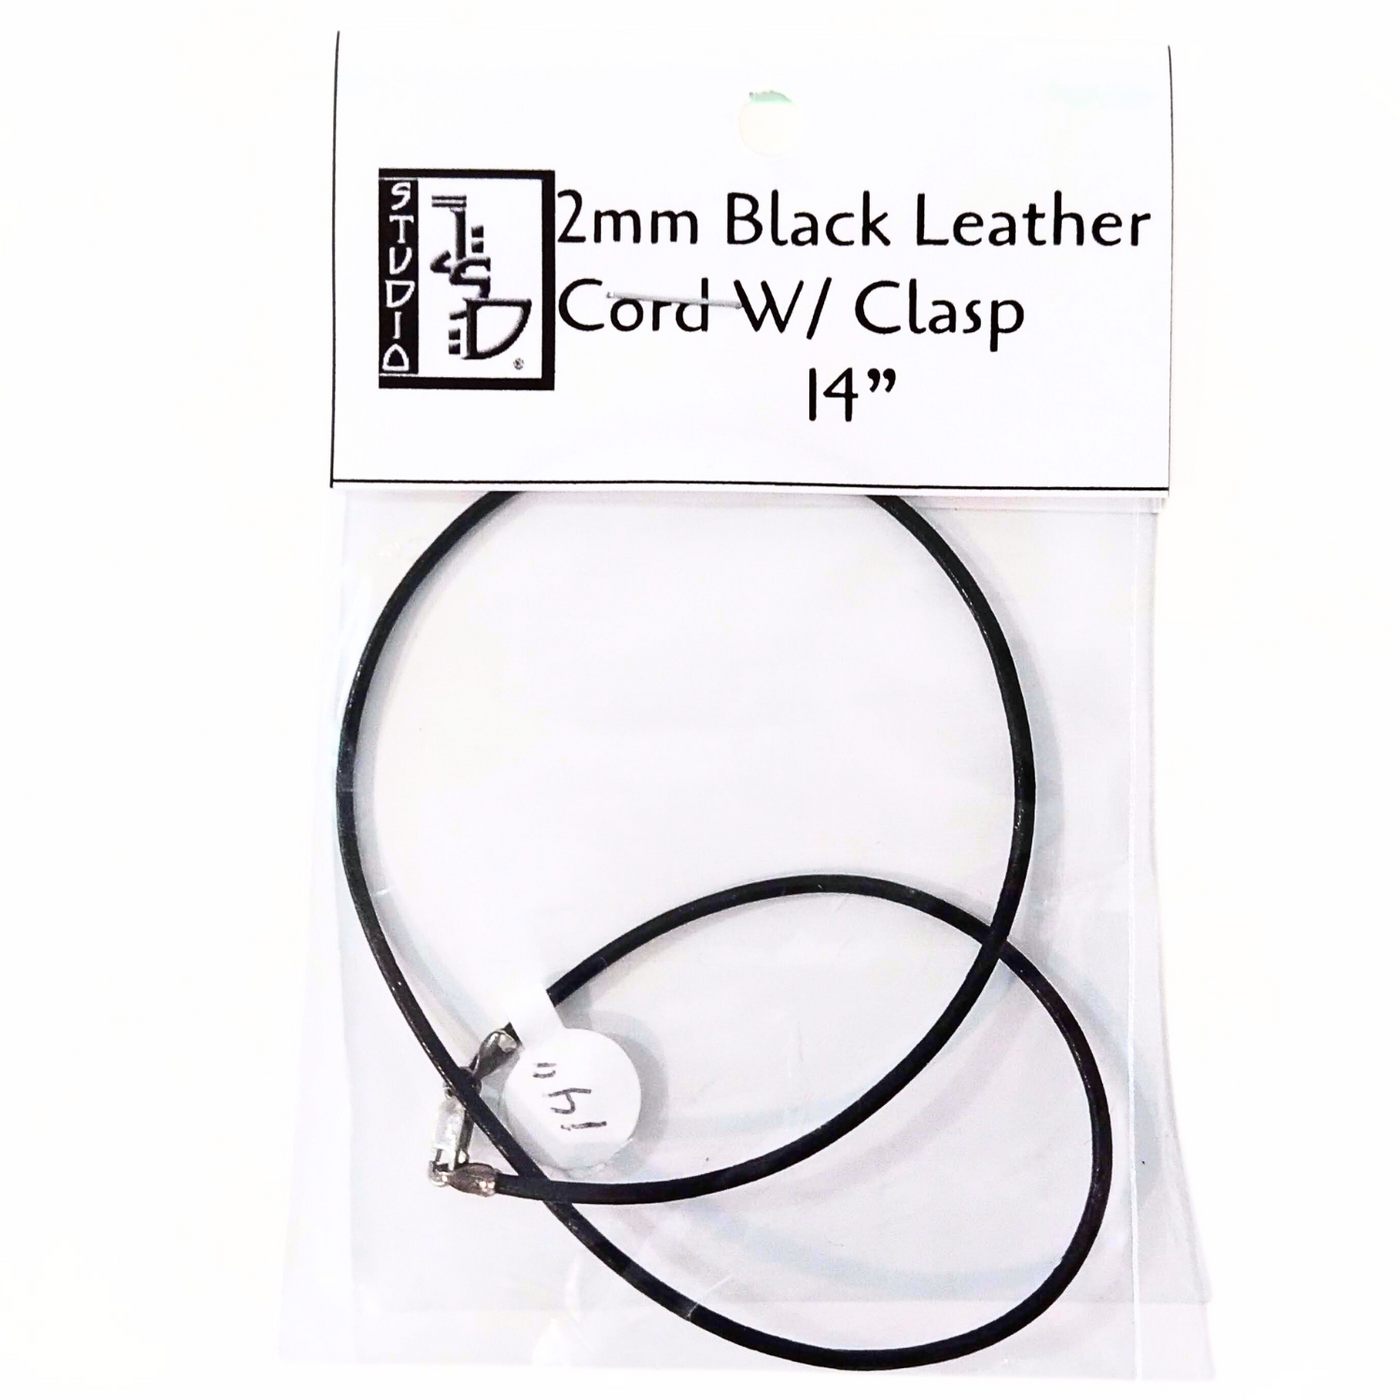 14" Black Leather Cord W/ Clasp 2mm